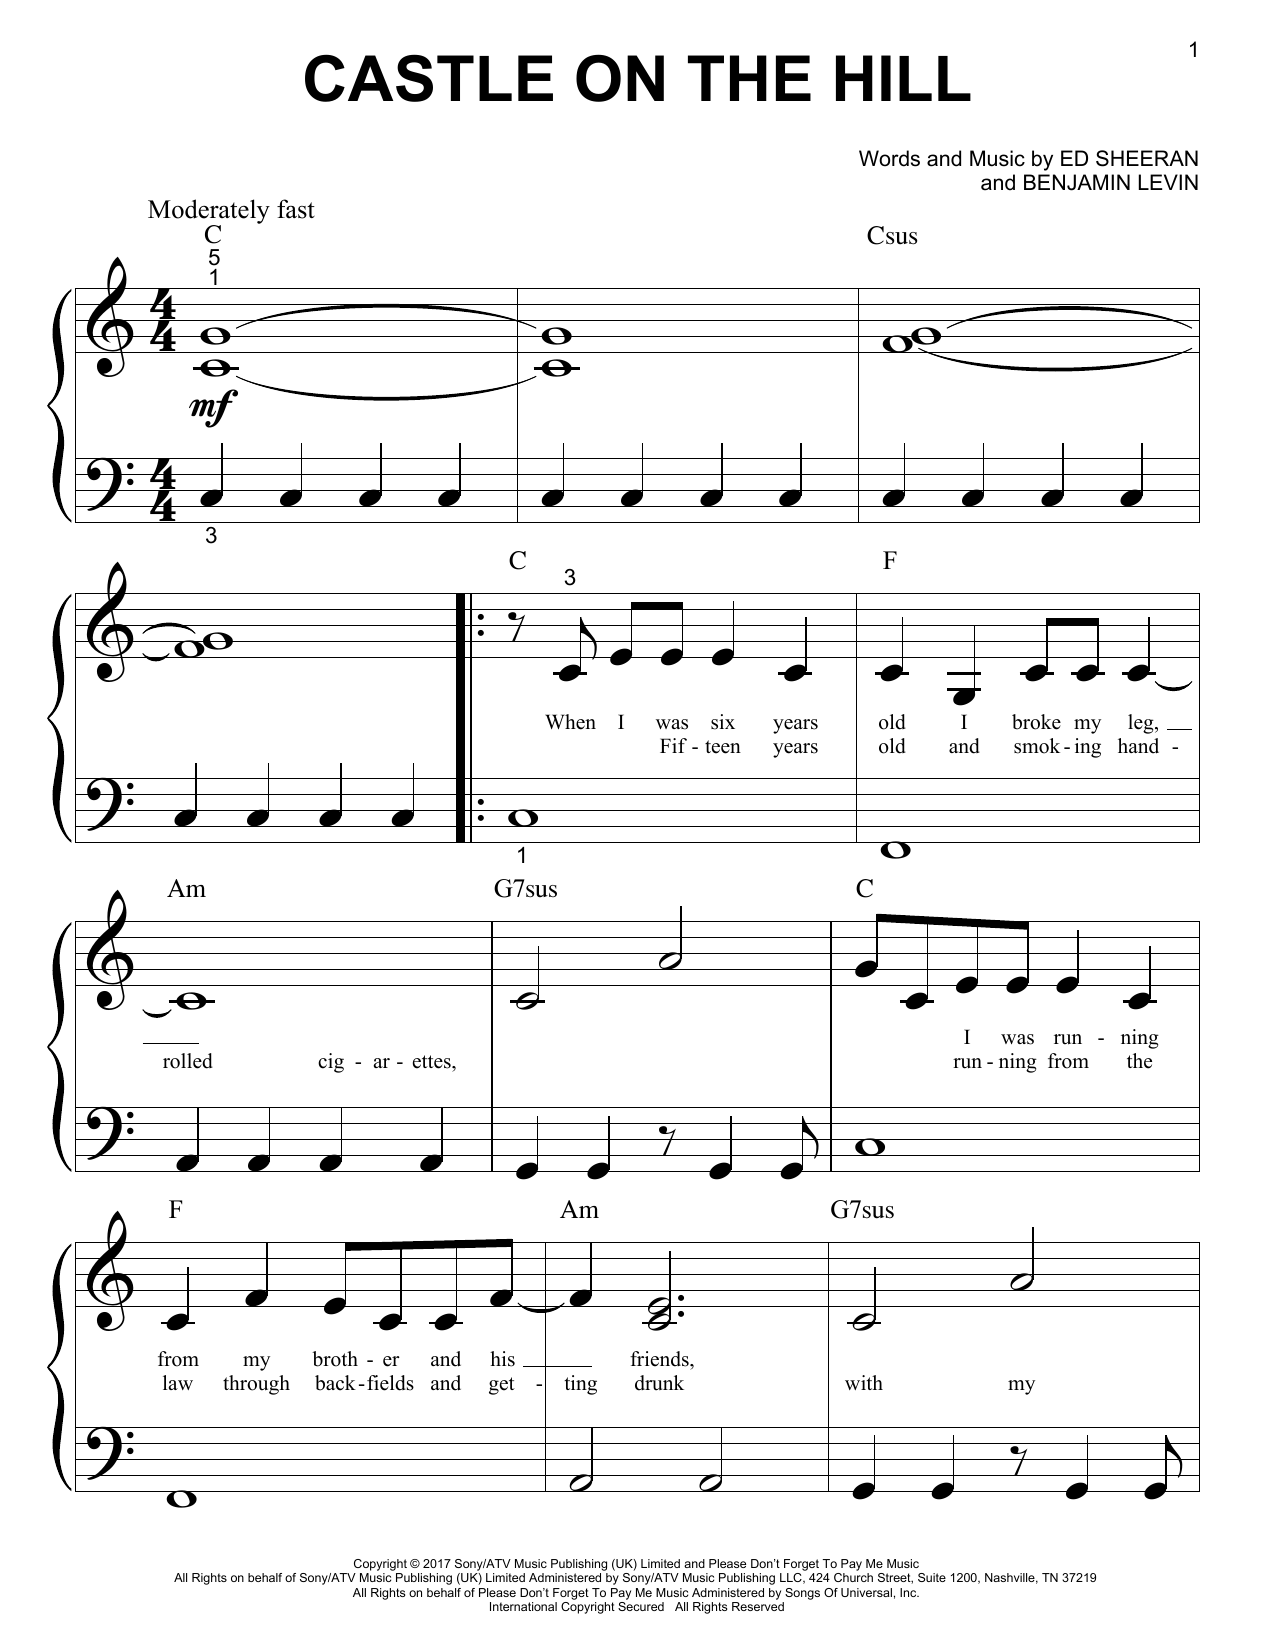 Download Ed Sheeran Castle On The Hill Sheet Music